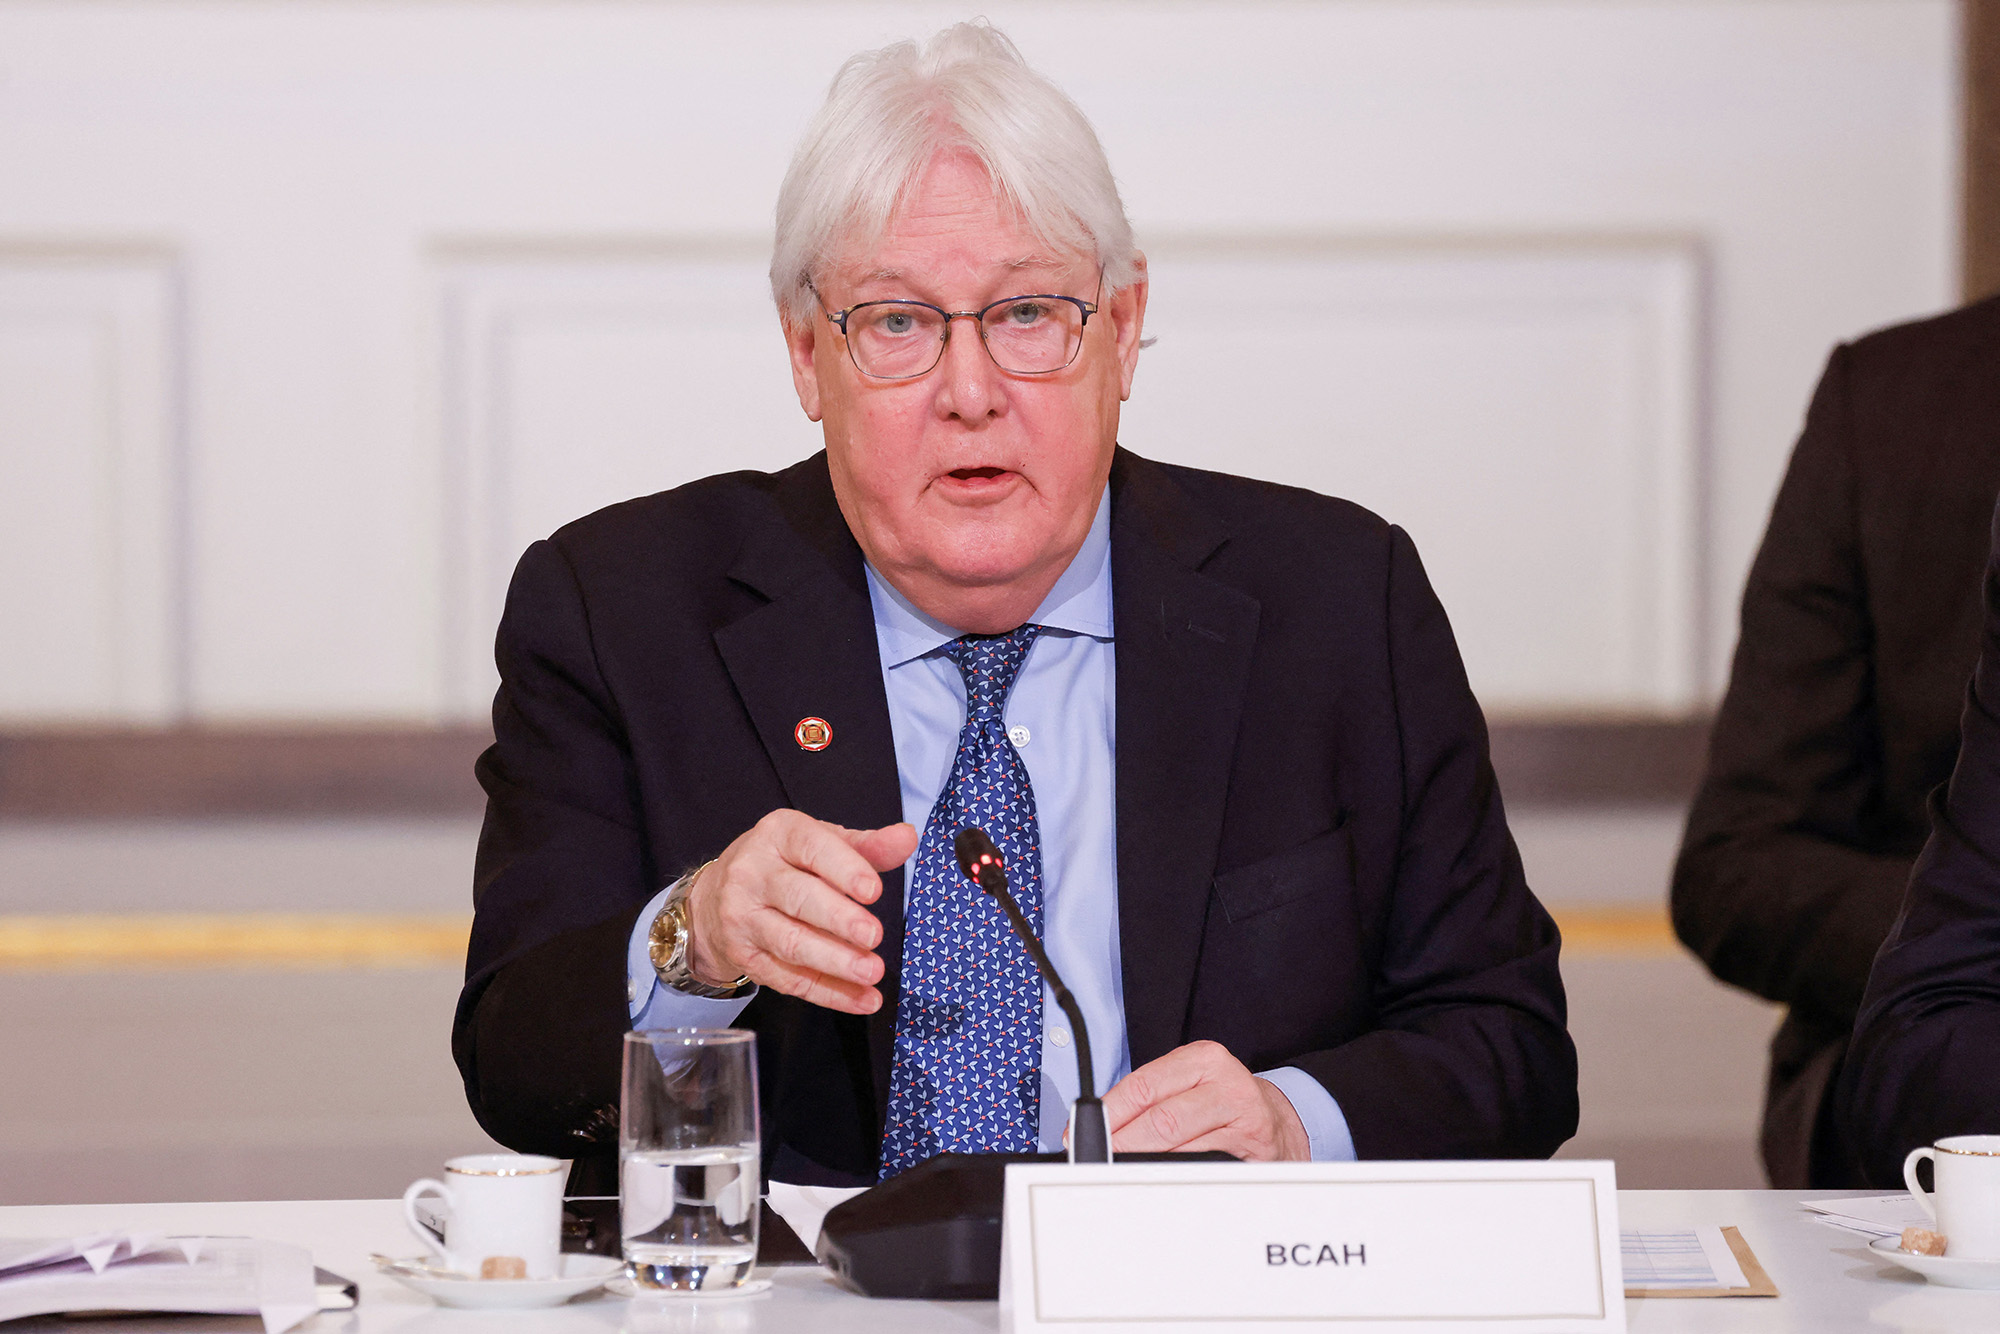 UN Under-Secretary General for Humanitarian Affairs and Emergency Relief Martin Griffiths speaks during an international conference for civilians in Gaza, at the Elysee Presidential Palace in Paris, France, on November 9.